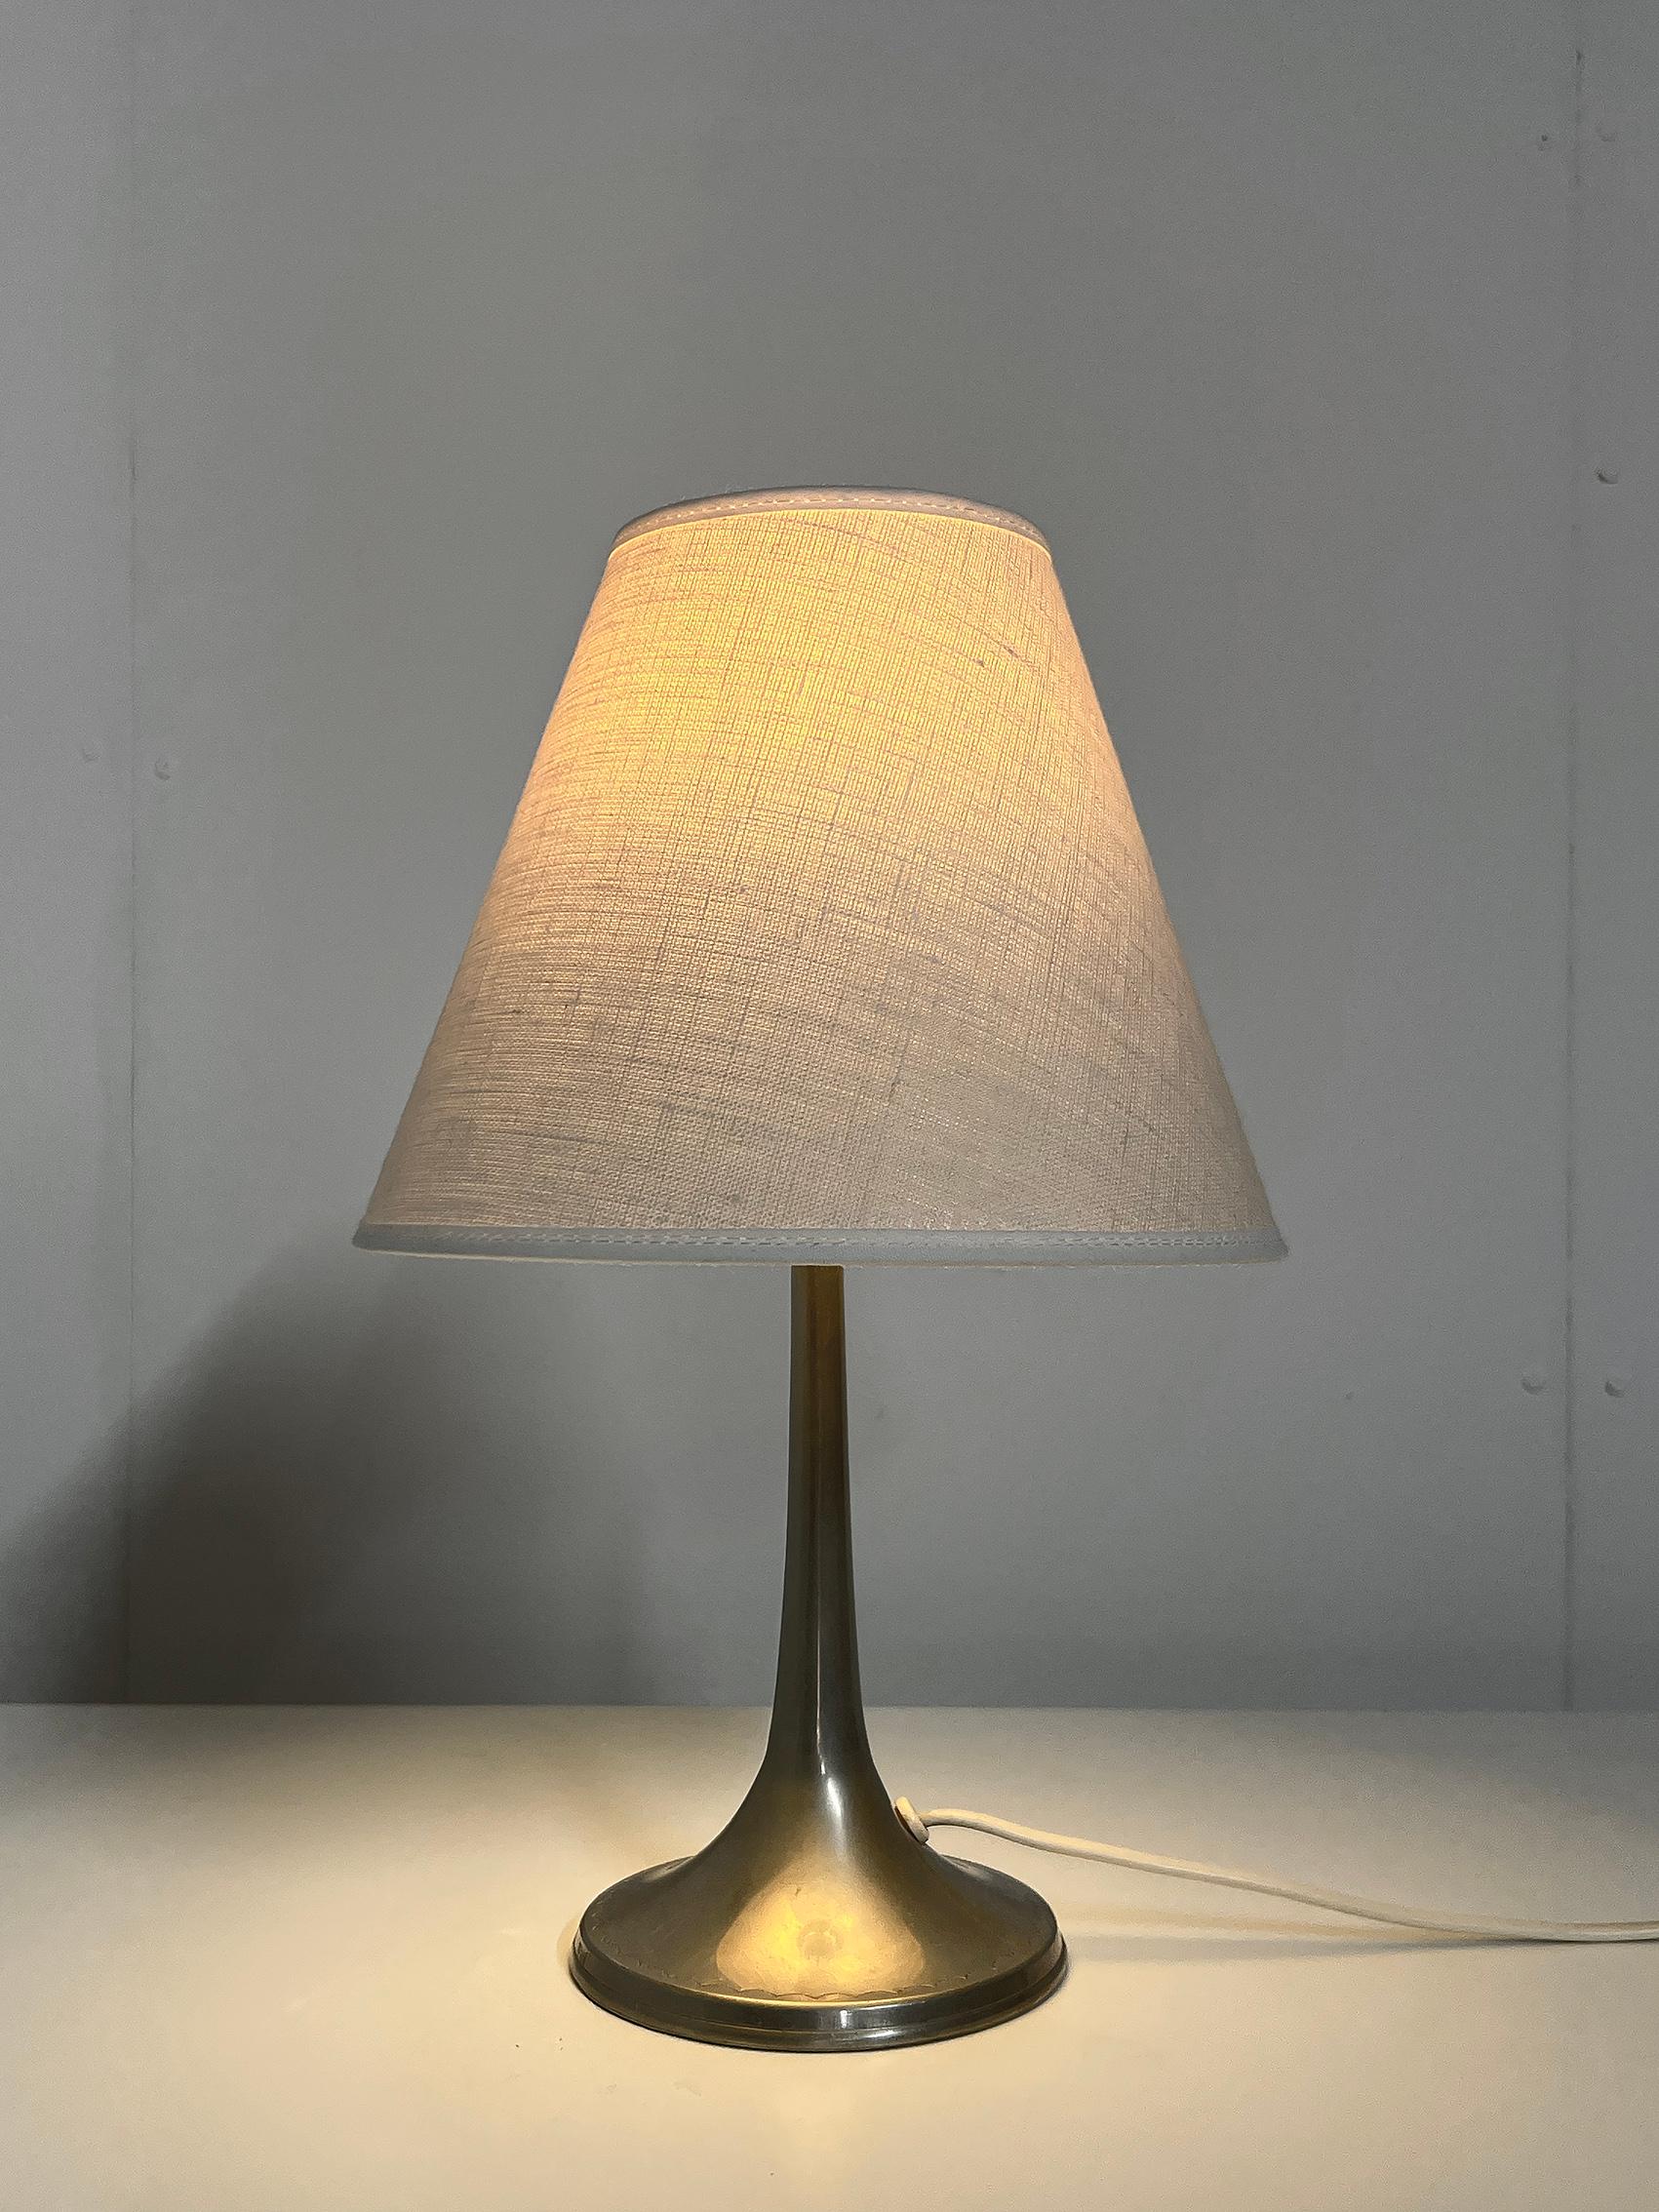 Swedish Scandinavian Modern Table Lamp In Pewter by Thorild Knutsson -1930 For Sale